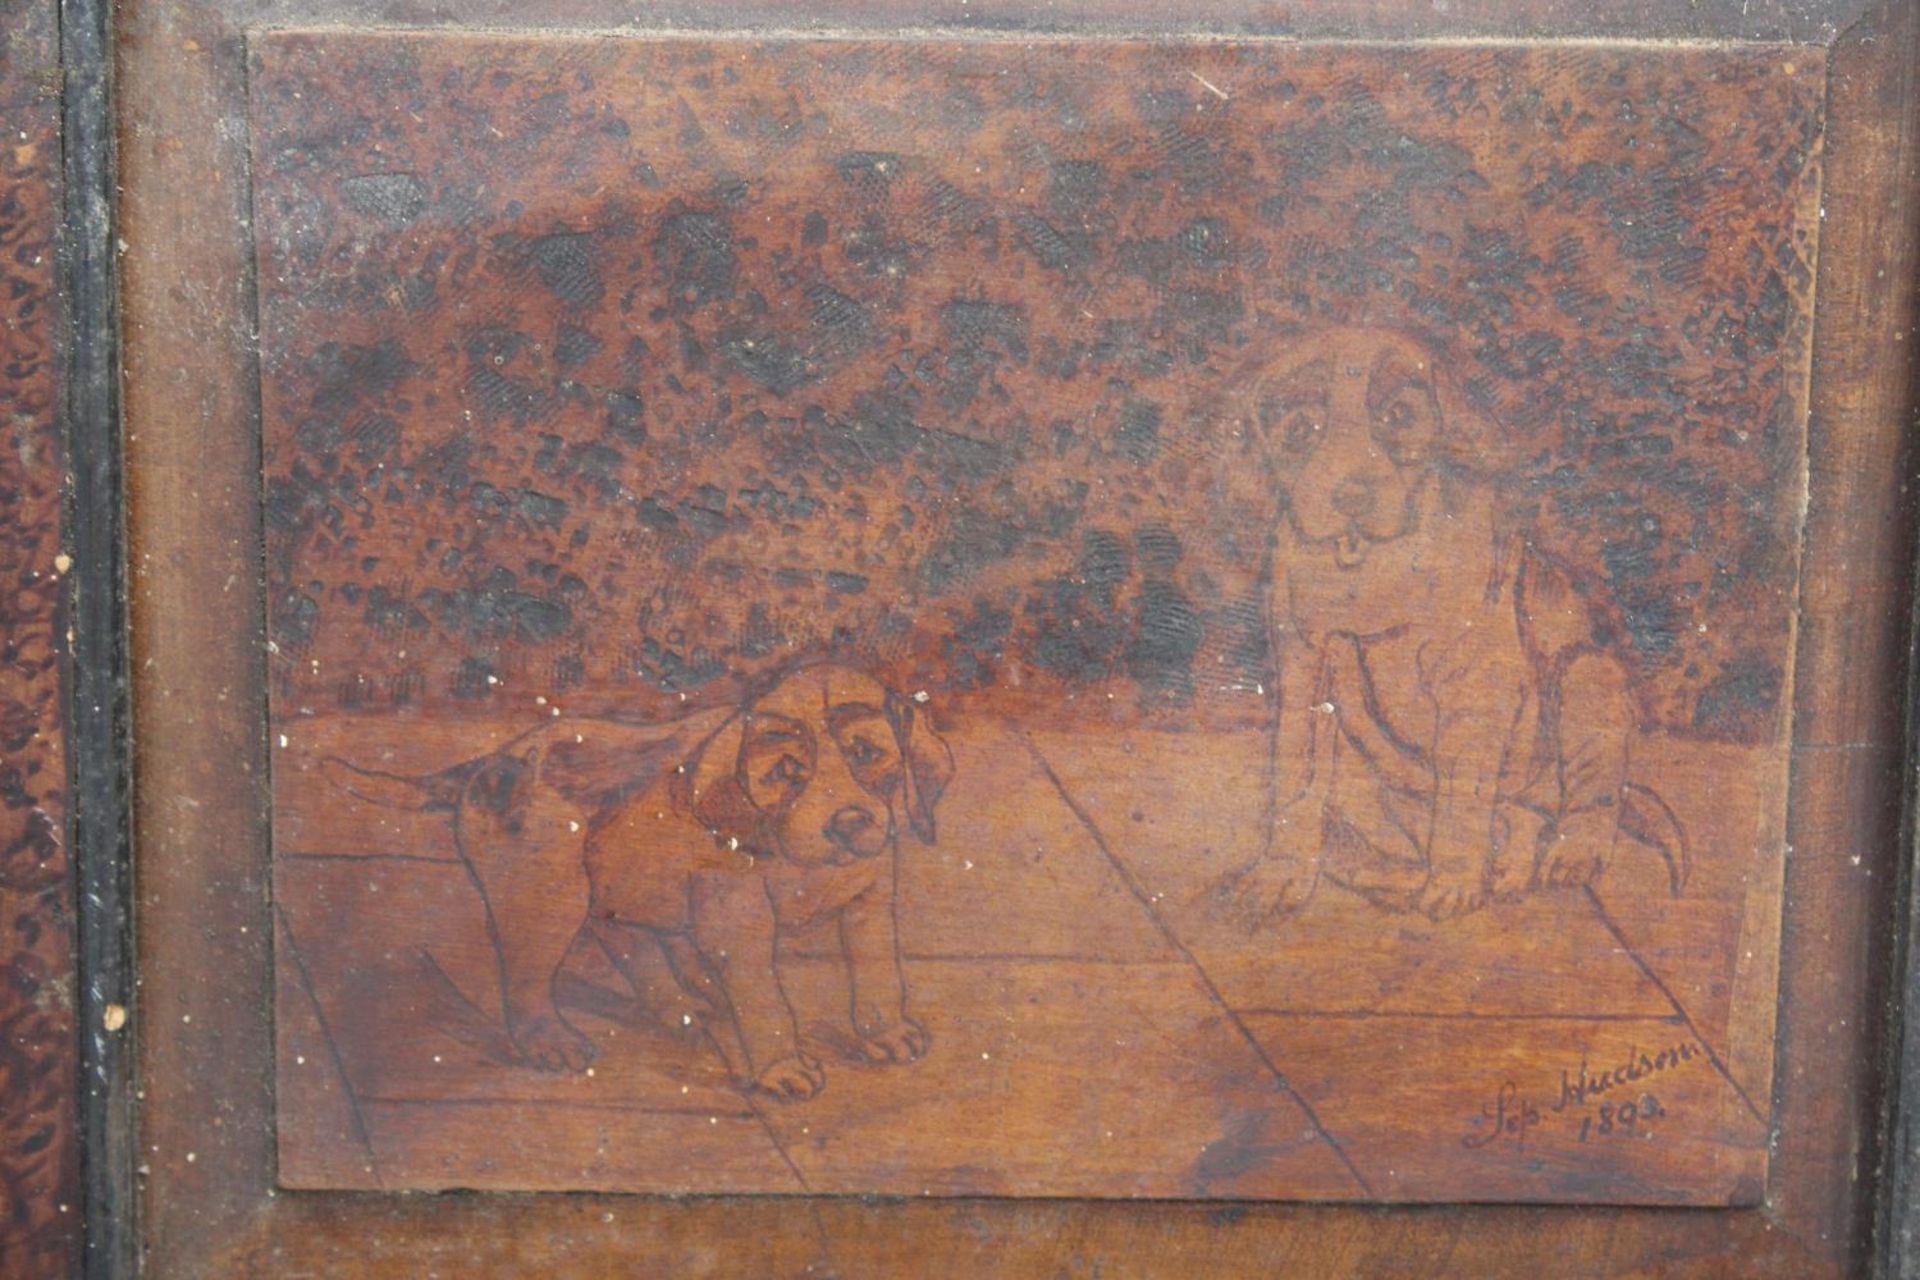 TWO VINTAGE WOODEN ETCHED BOARDS DEPICTING DOGS SIGNED AND DATED HUDSON 1893 TO THE BOTTOM RIGHT - Image 4 of 4